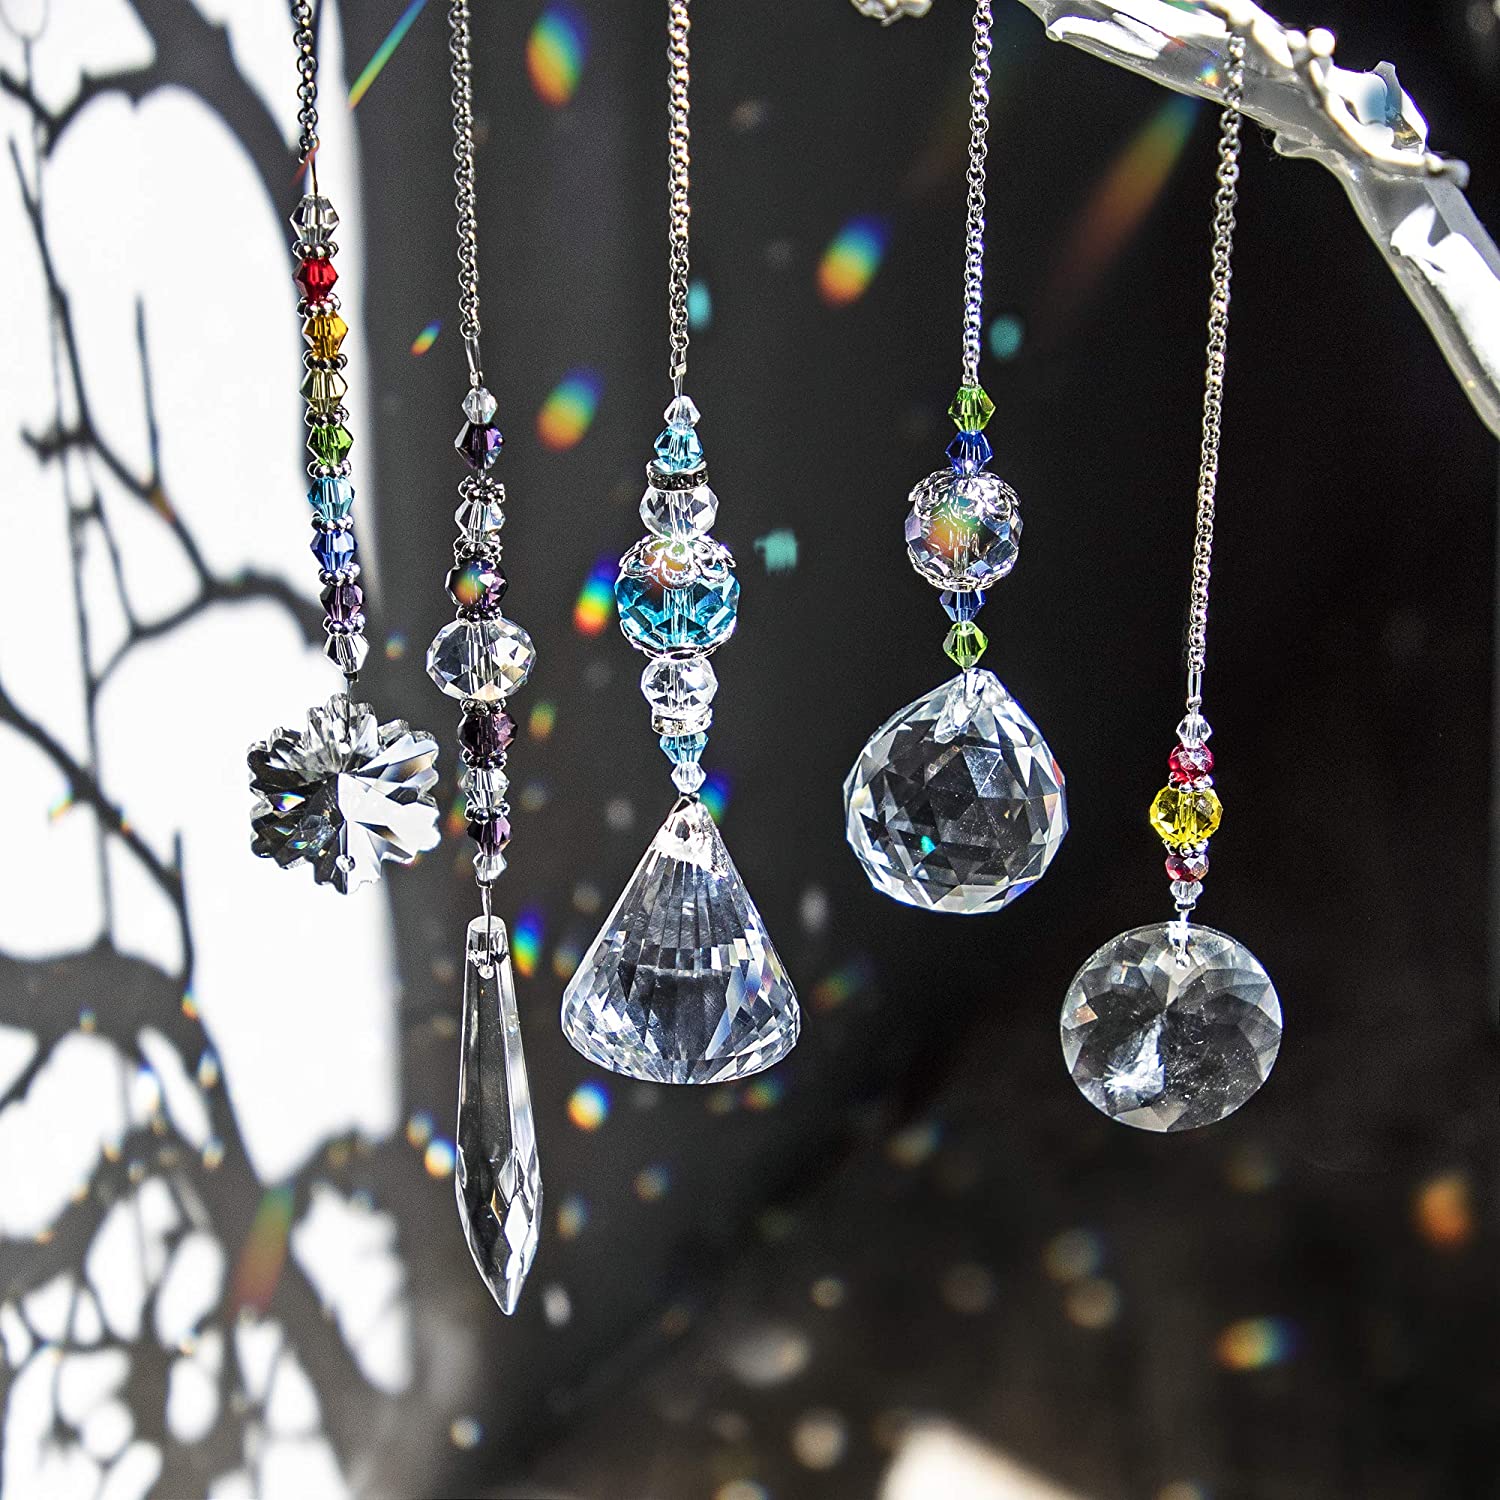 H&D HYALINE & DORA 1 5PCS Crystal Suncatchers for Windows Pendants, Sun  Catcher with Colorful Crystal Prisms Chain Christmas Ornament for Window  Home